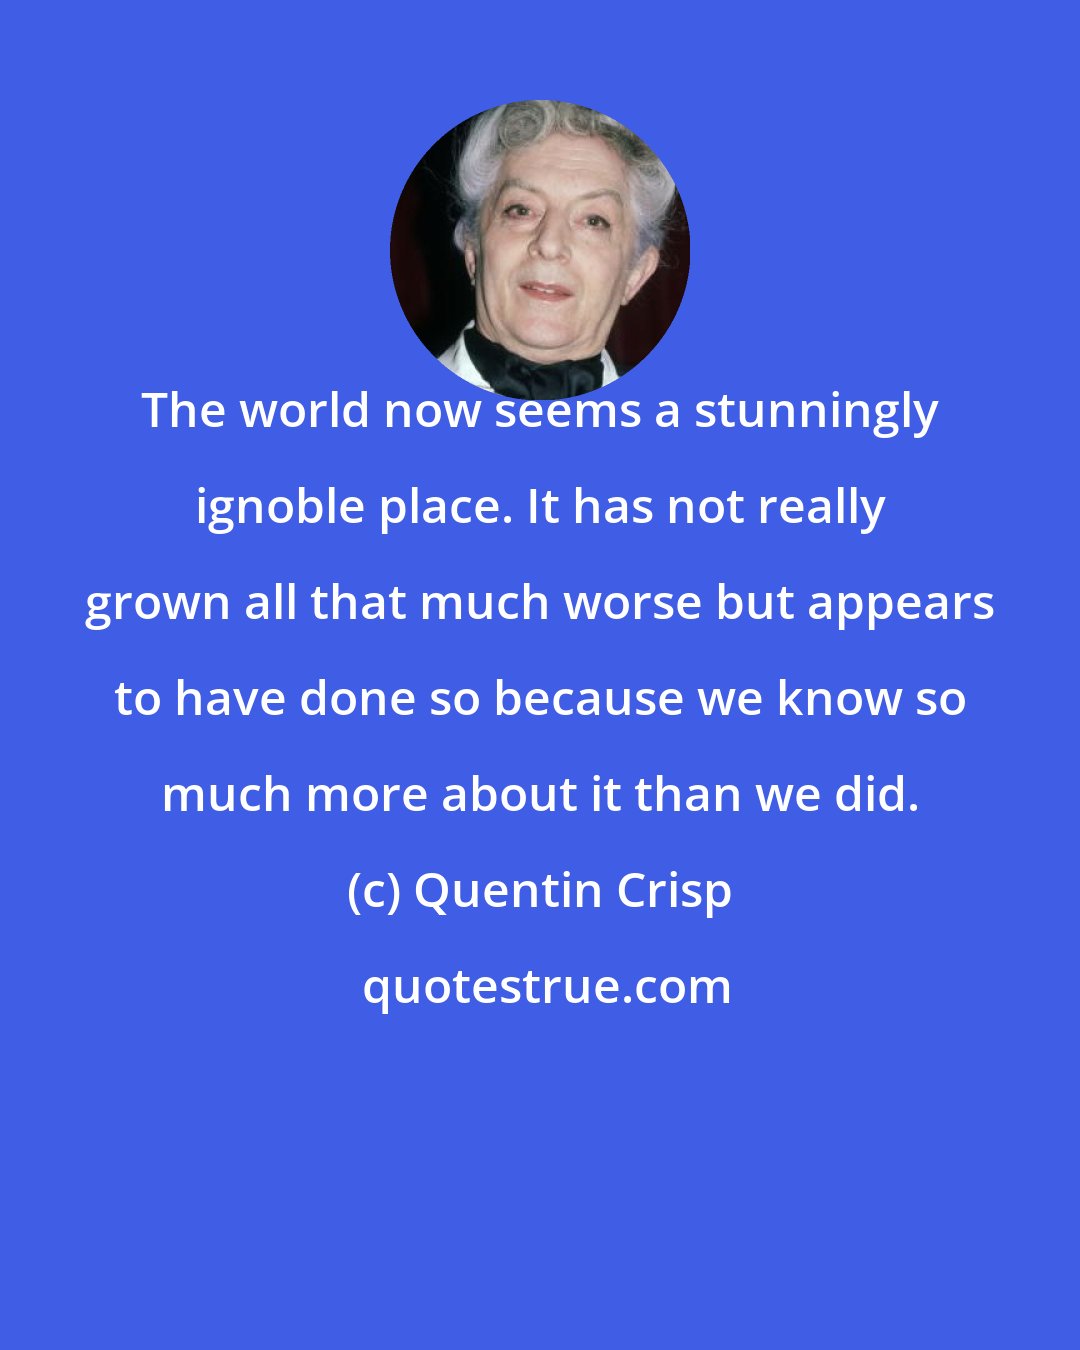 Quentin Crisp: The world now seems a stunningly ignoble place. It has not really grown all that much worse but appears to have done so because we know so much more about it than we did.